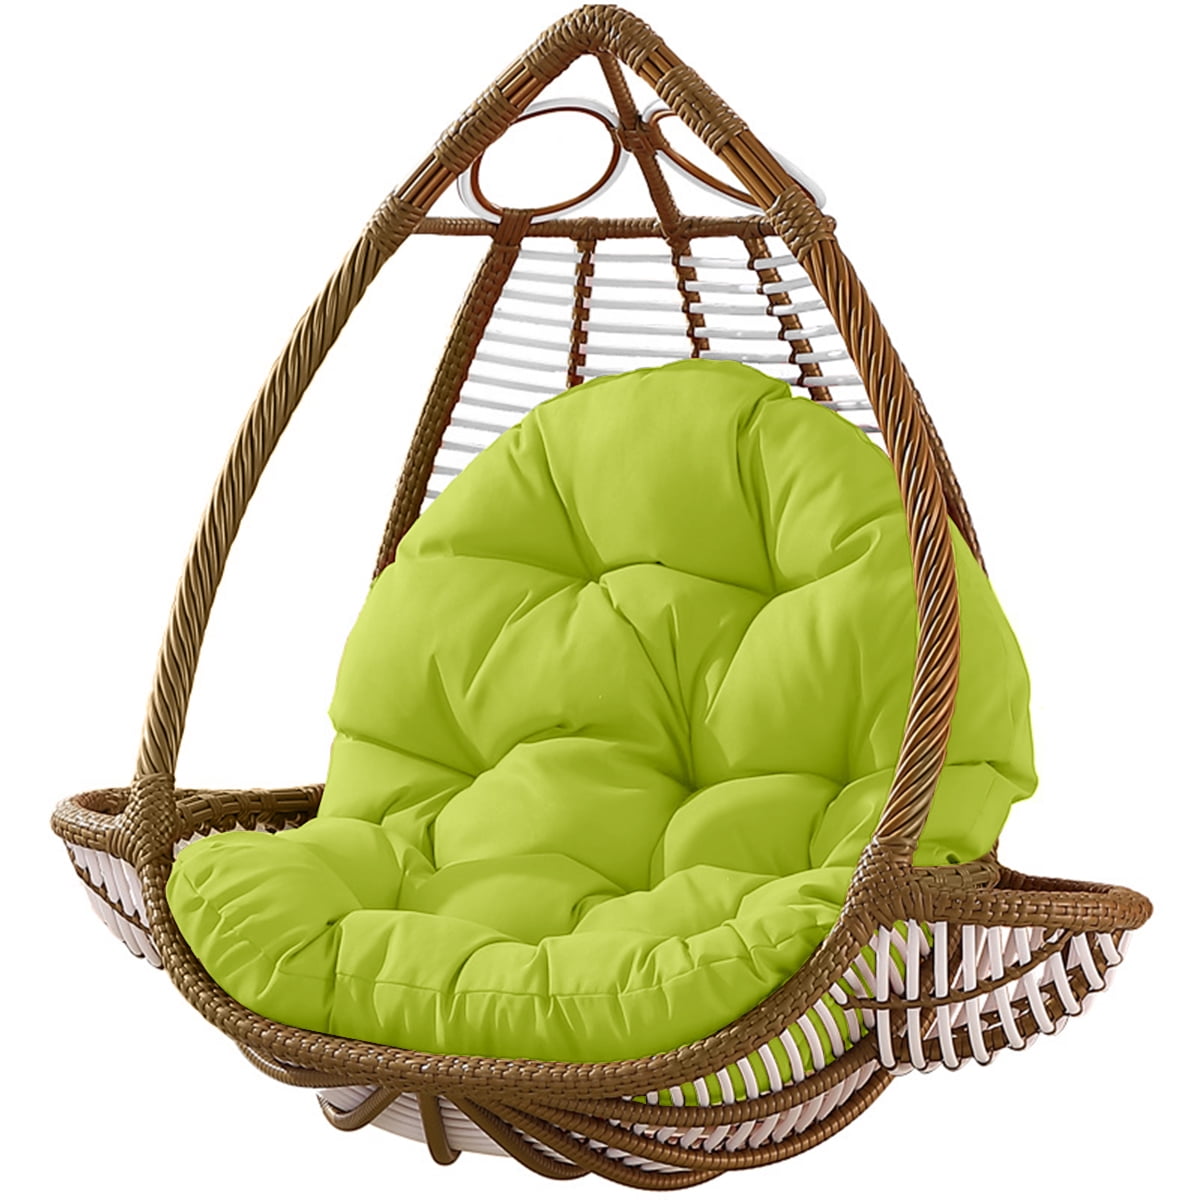 Hanging Egg Swing Basket Wicker Chair Cushion Seat Pad Pillow Home Decor Feng8 